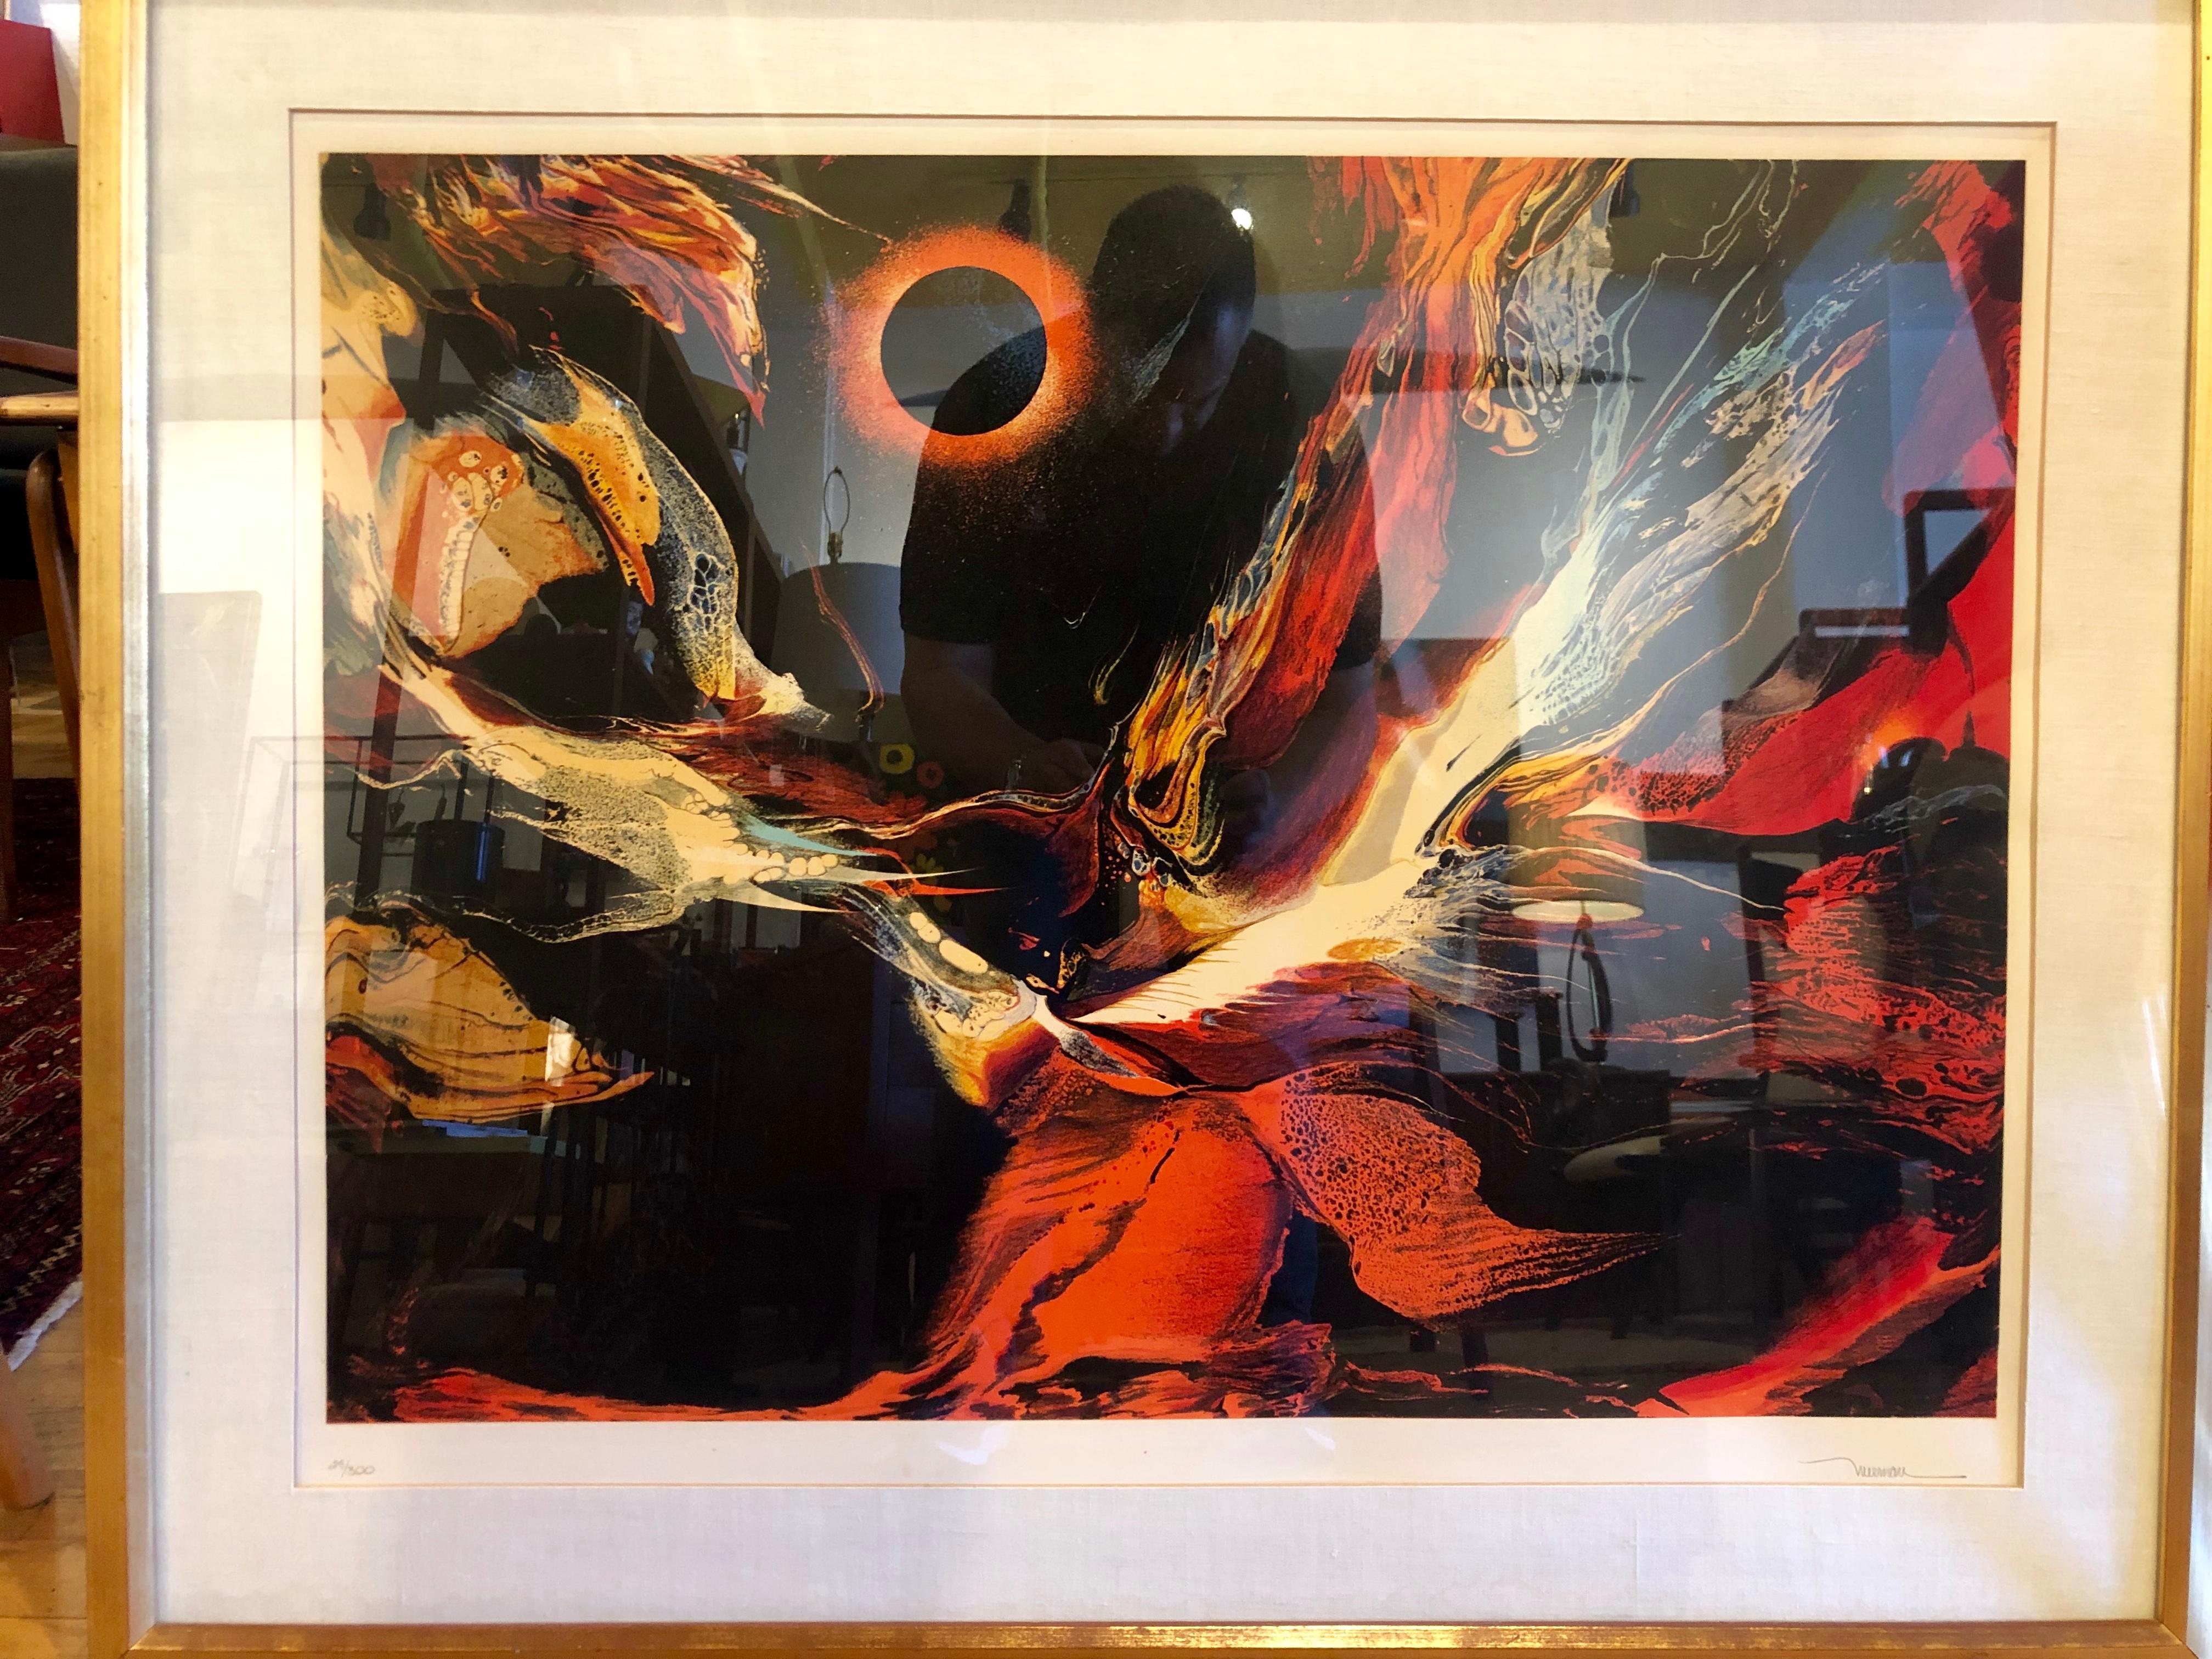 Leonardo Nierman signed and number serigraph published by Merrill Chase Galleries the frame its in good condition nicely frame with gold leaf finish some light wear due to age with linen mat comes with 